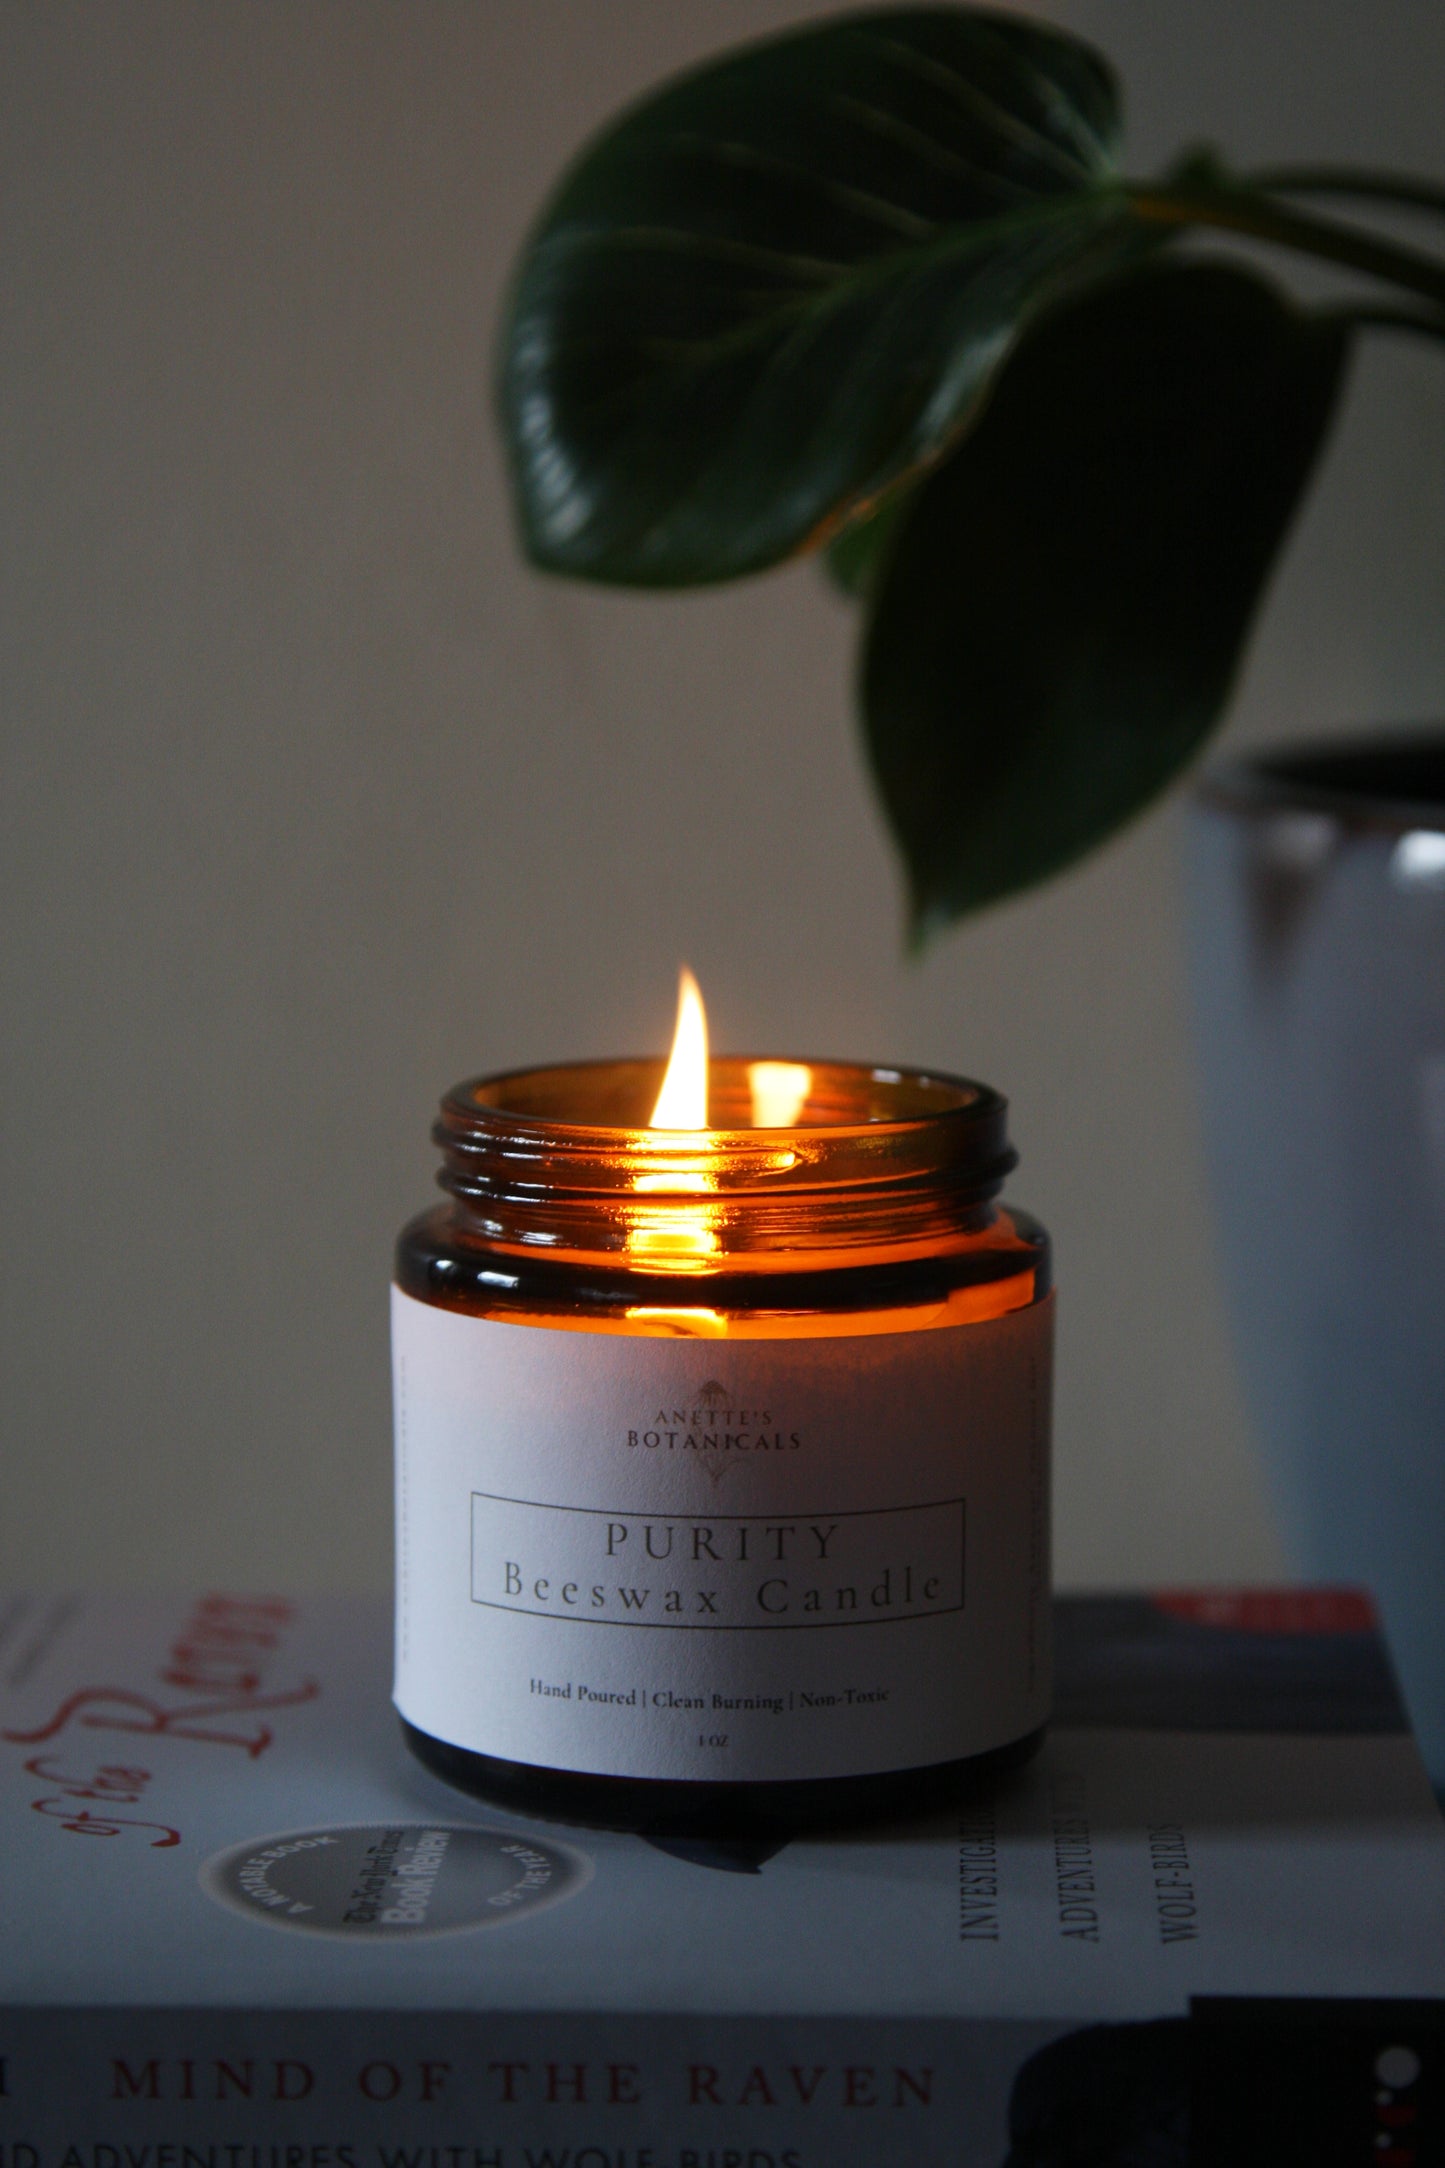 Purity - Beeswax Candle